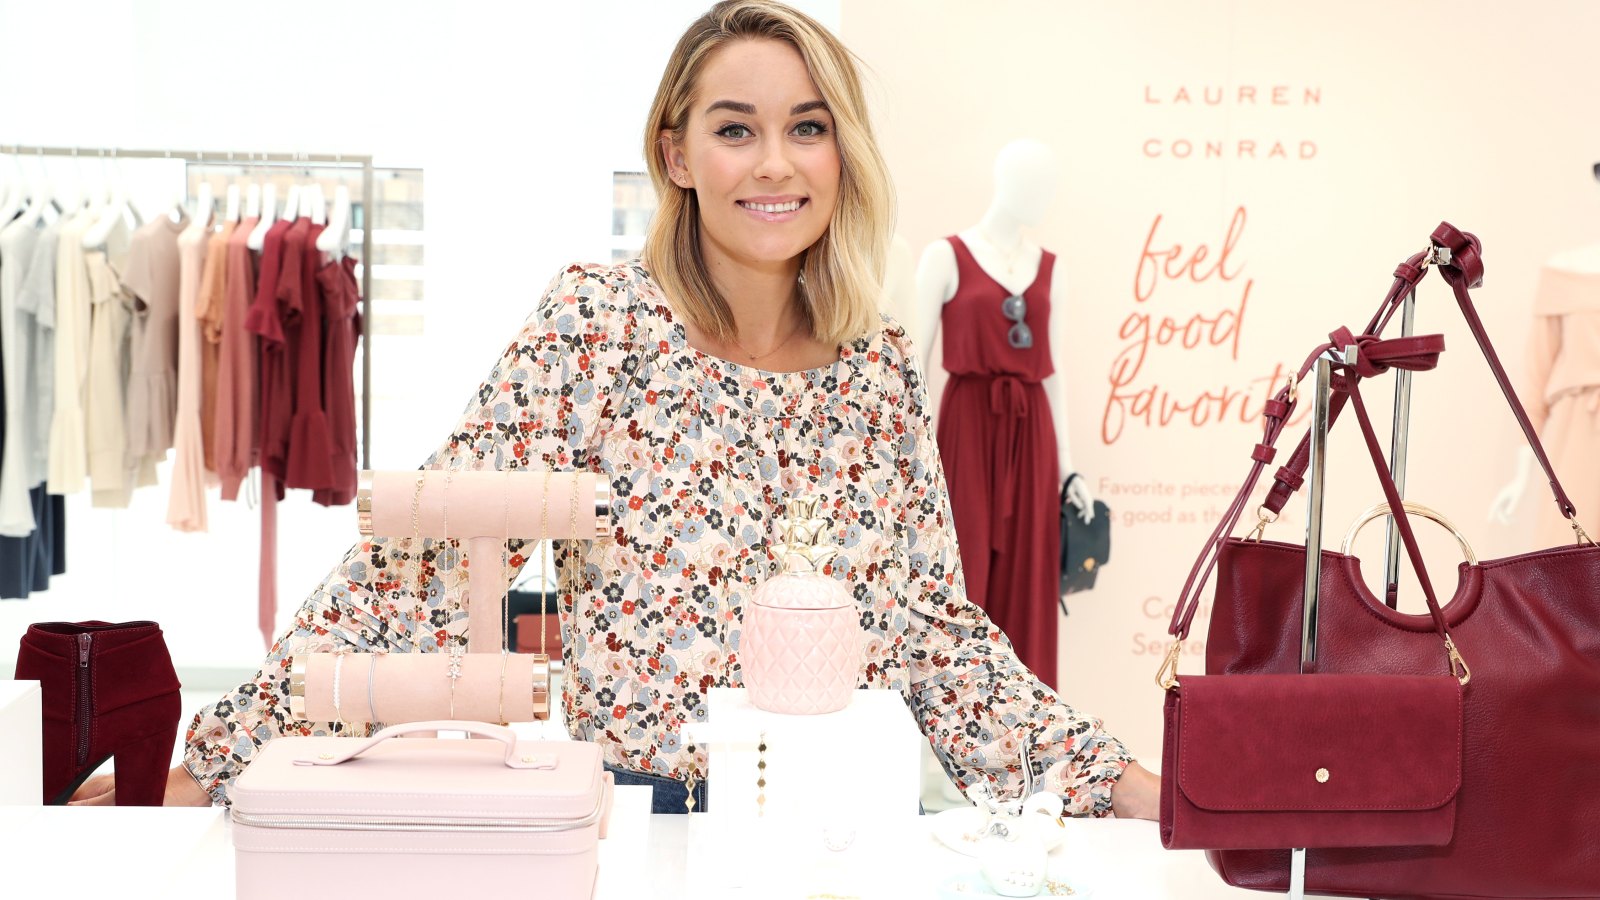 Lauren Conrad Clothes and Outfits, Page 5